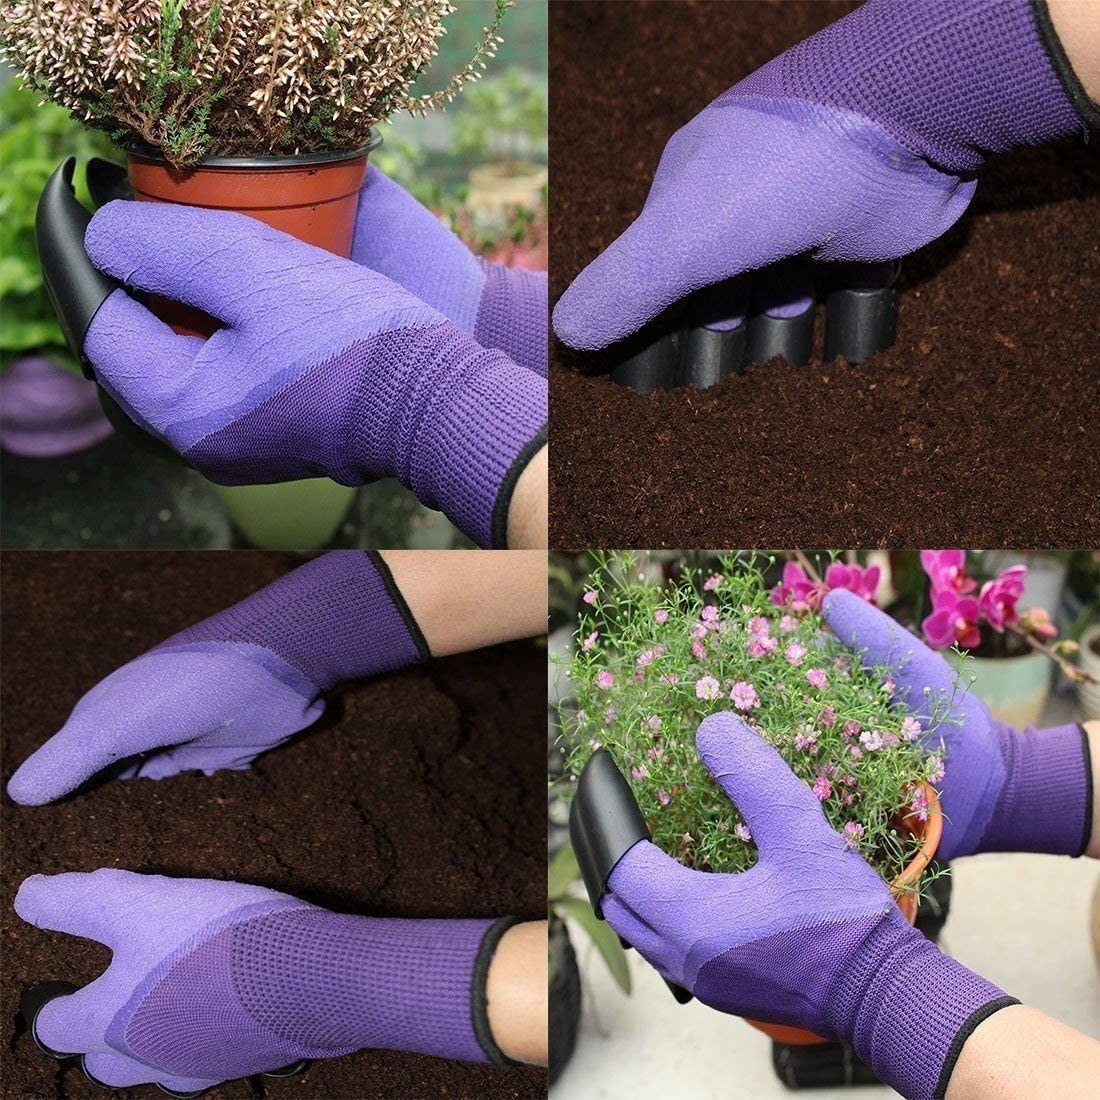 Reviewer using gloves with claws to garden